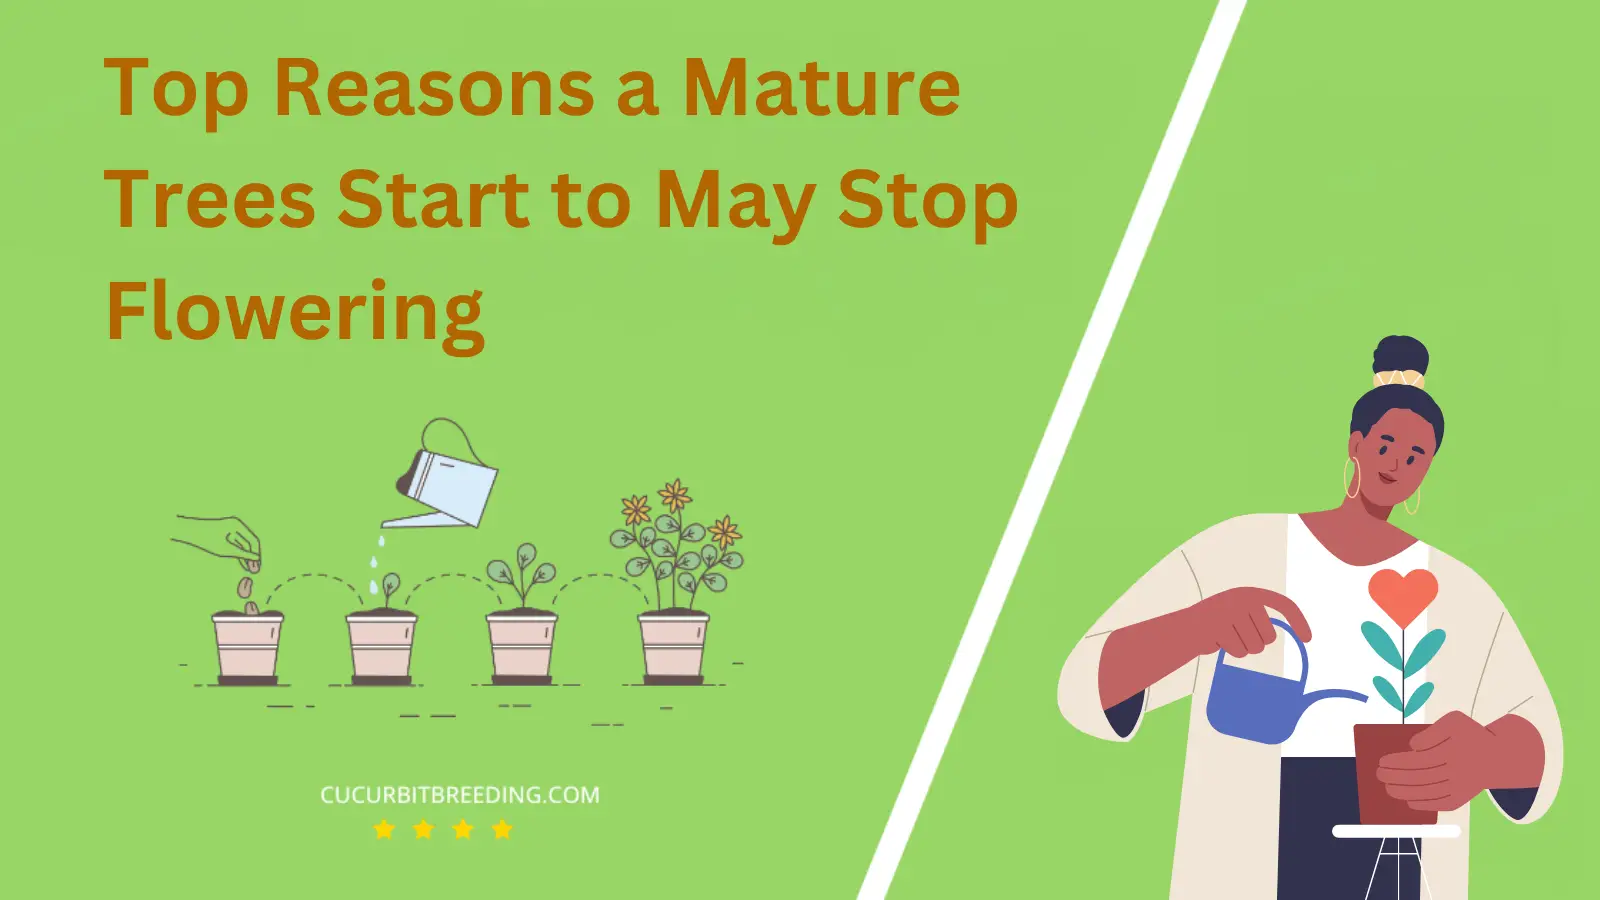 Top Reasons a Mature Trees Start to May Stop Flowering